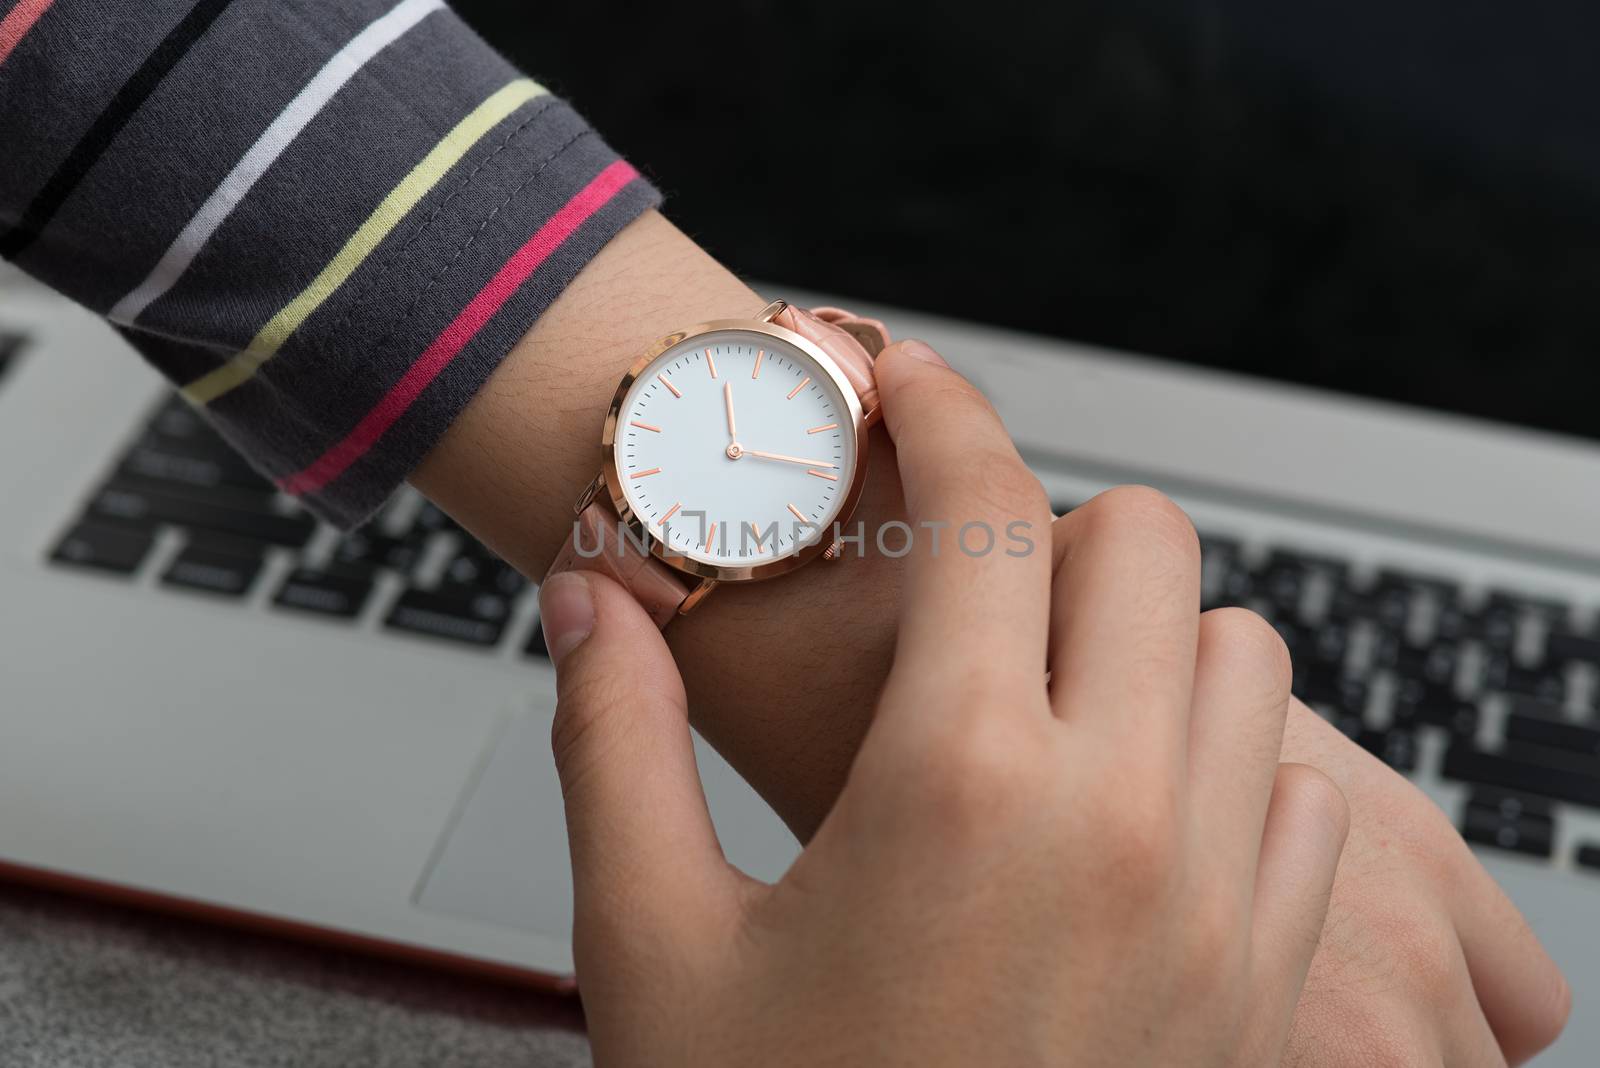 Girl's hand with wrist watch in front of notebook computer